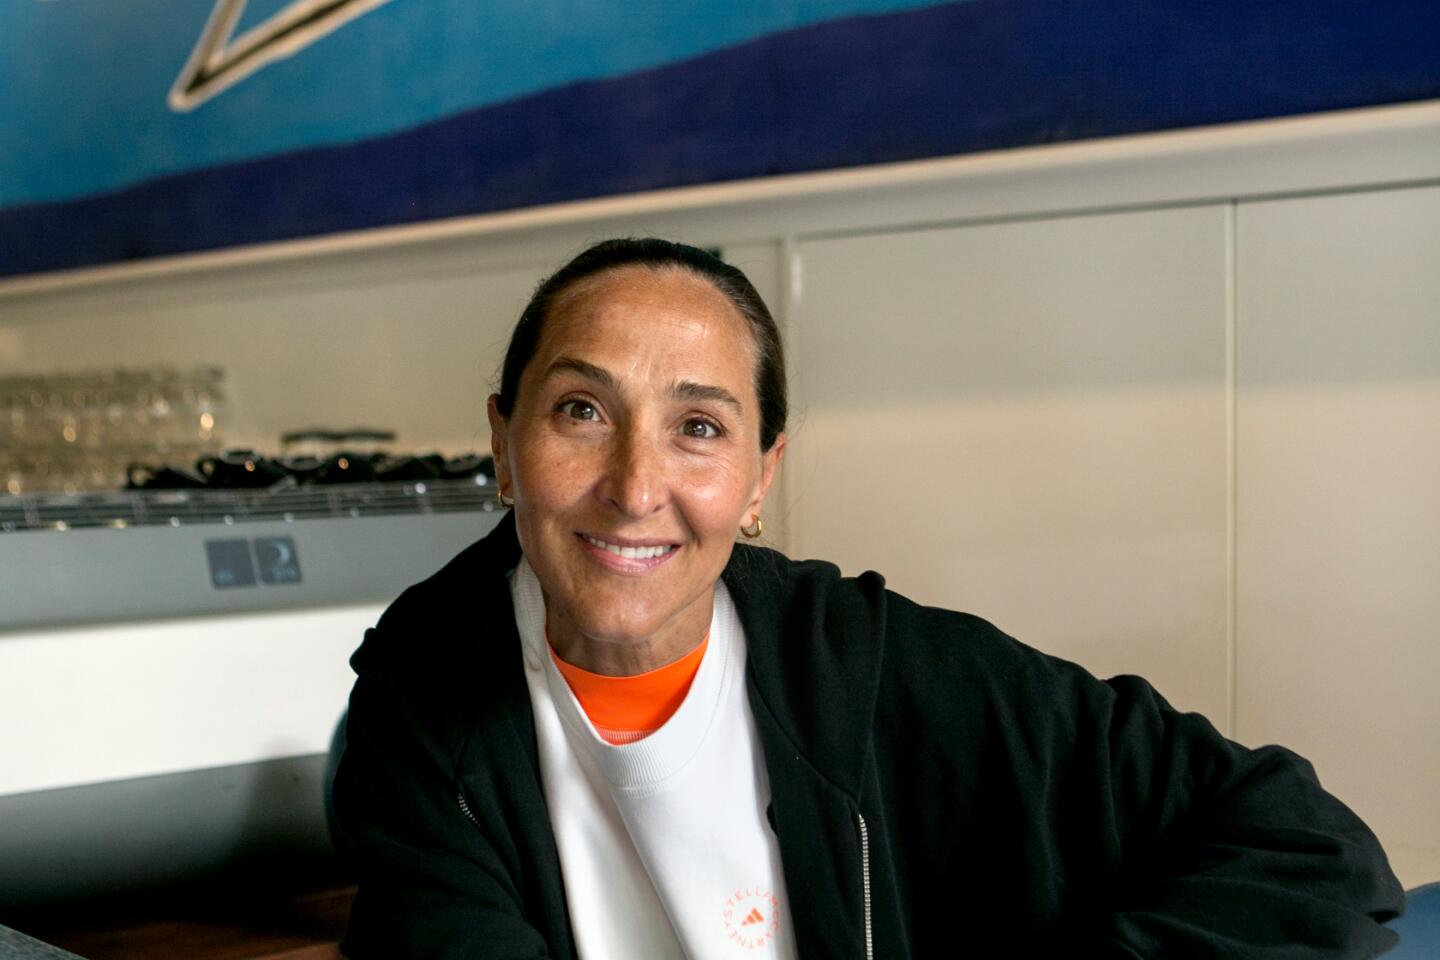 Gabriela Cámara is the chef and owner of Mexico City's popular seafood restaurant Contramar